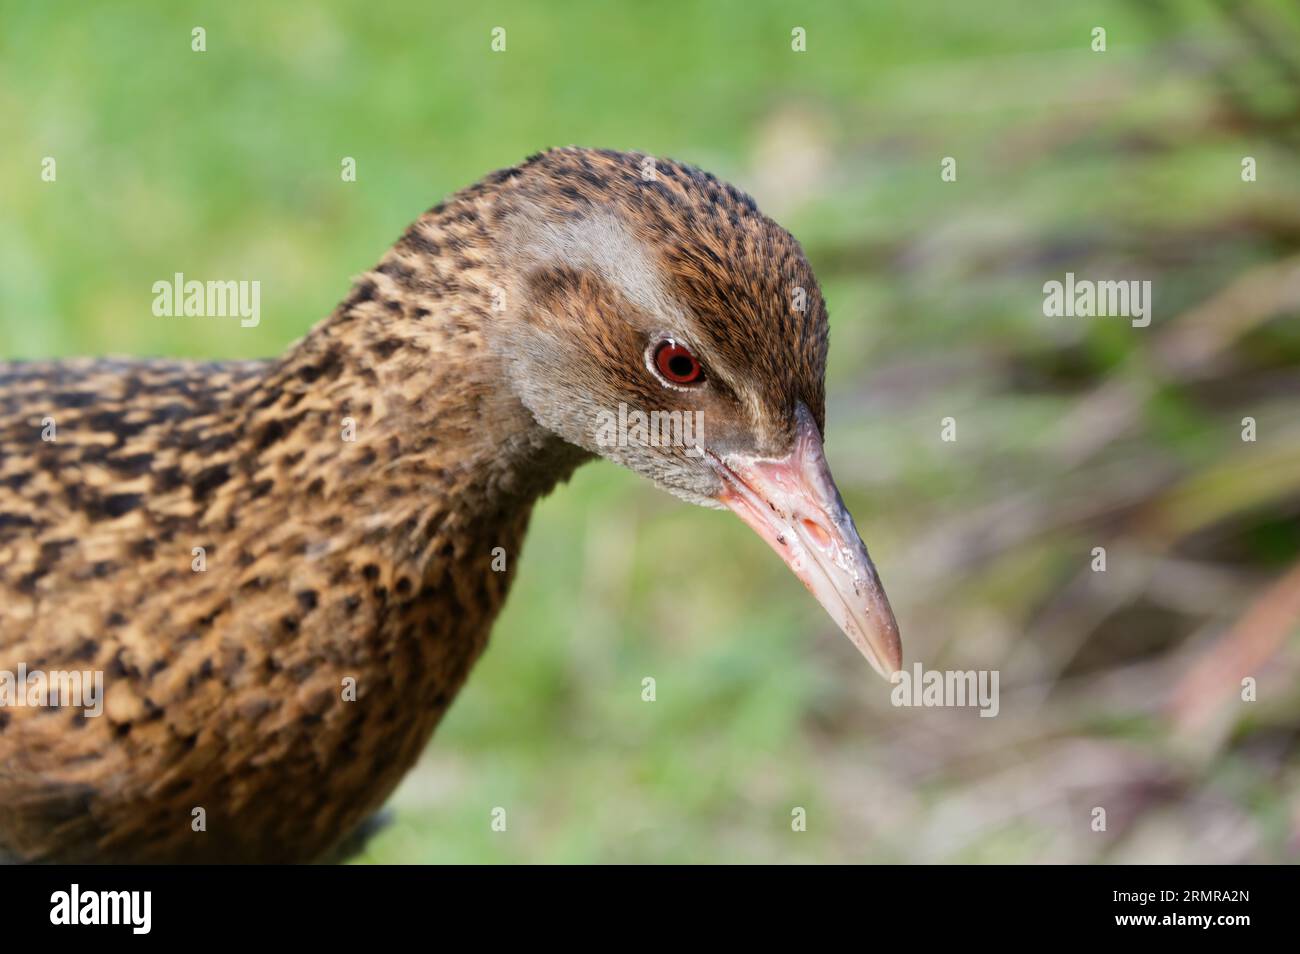 A brown, flightless, native New Zealand bird, the weka is know to be curious. Stock Photo